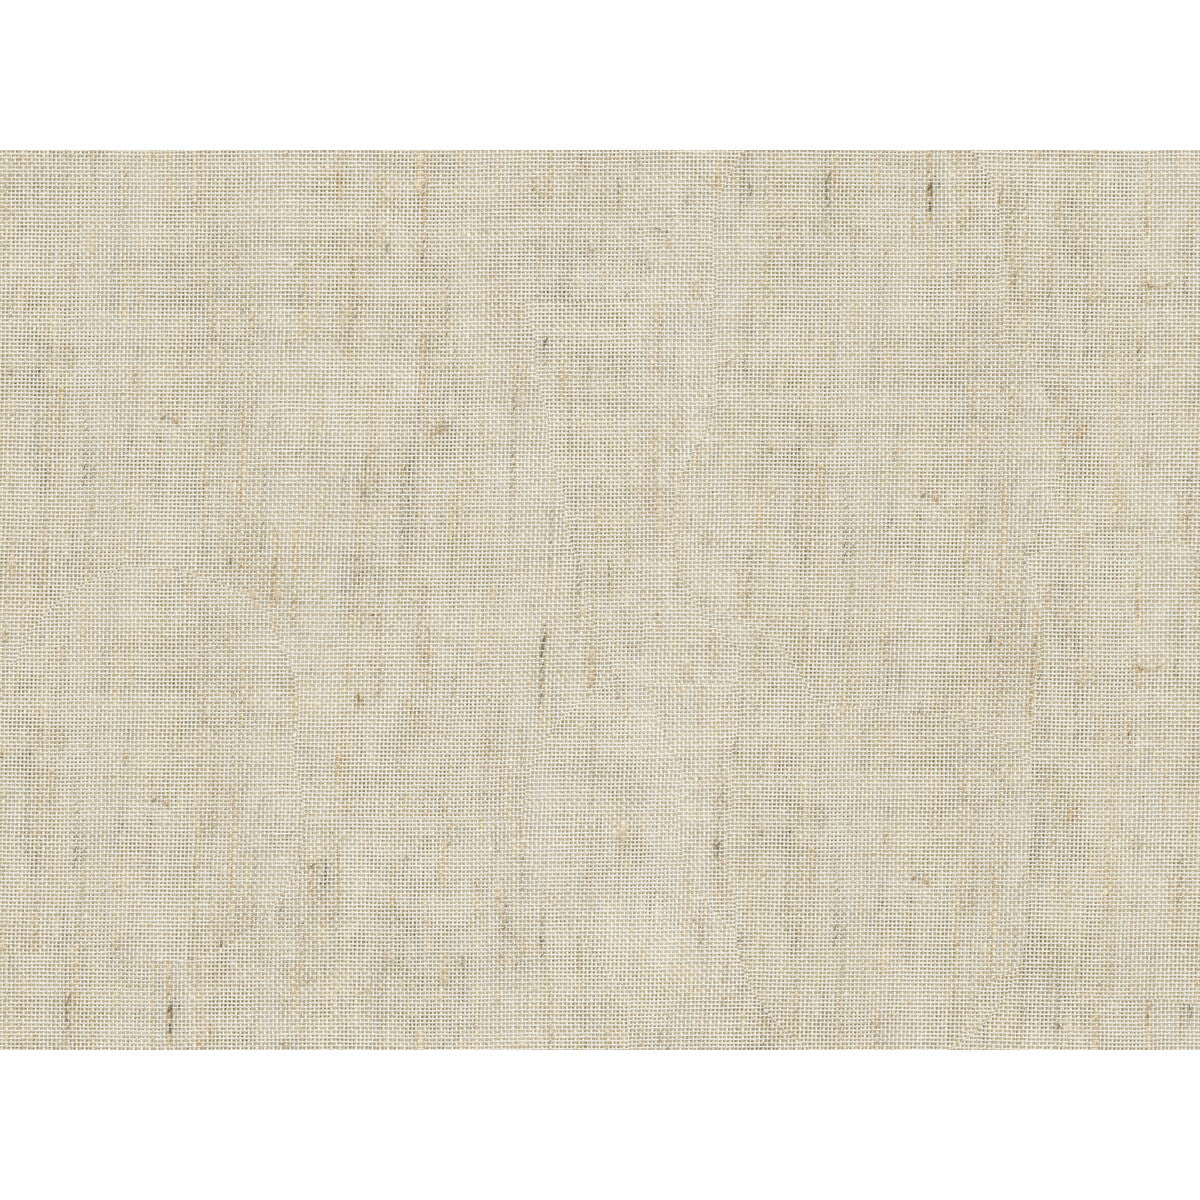 Kravet Contract fabric in 4541-116 color - pattern 4541.116.0 - by Kravet Contract